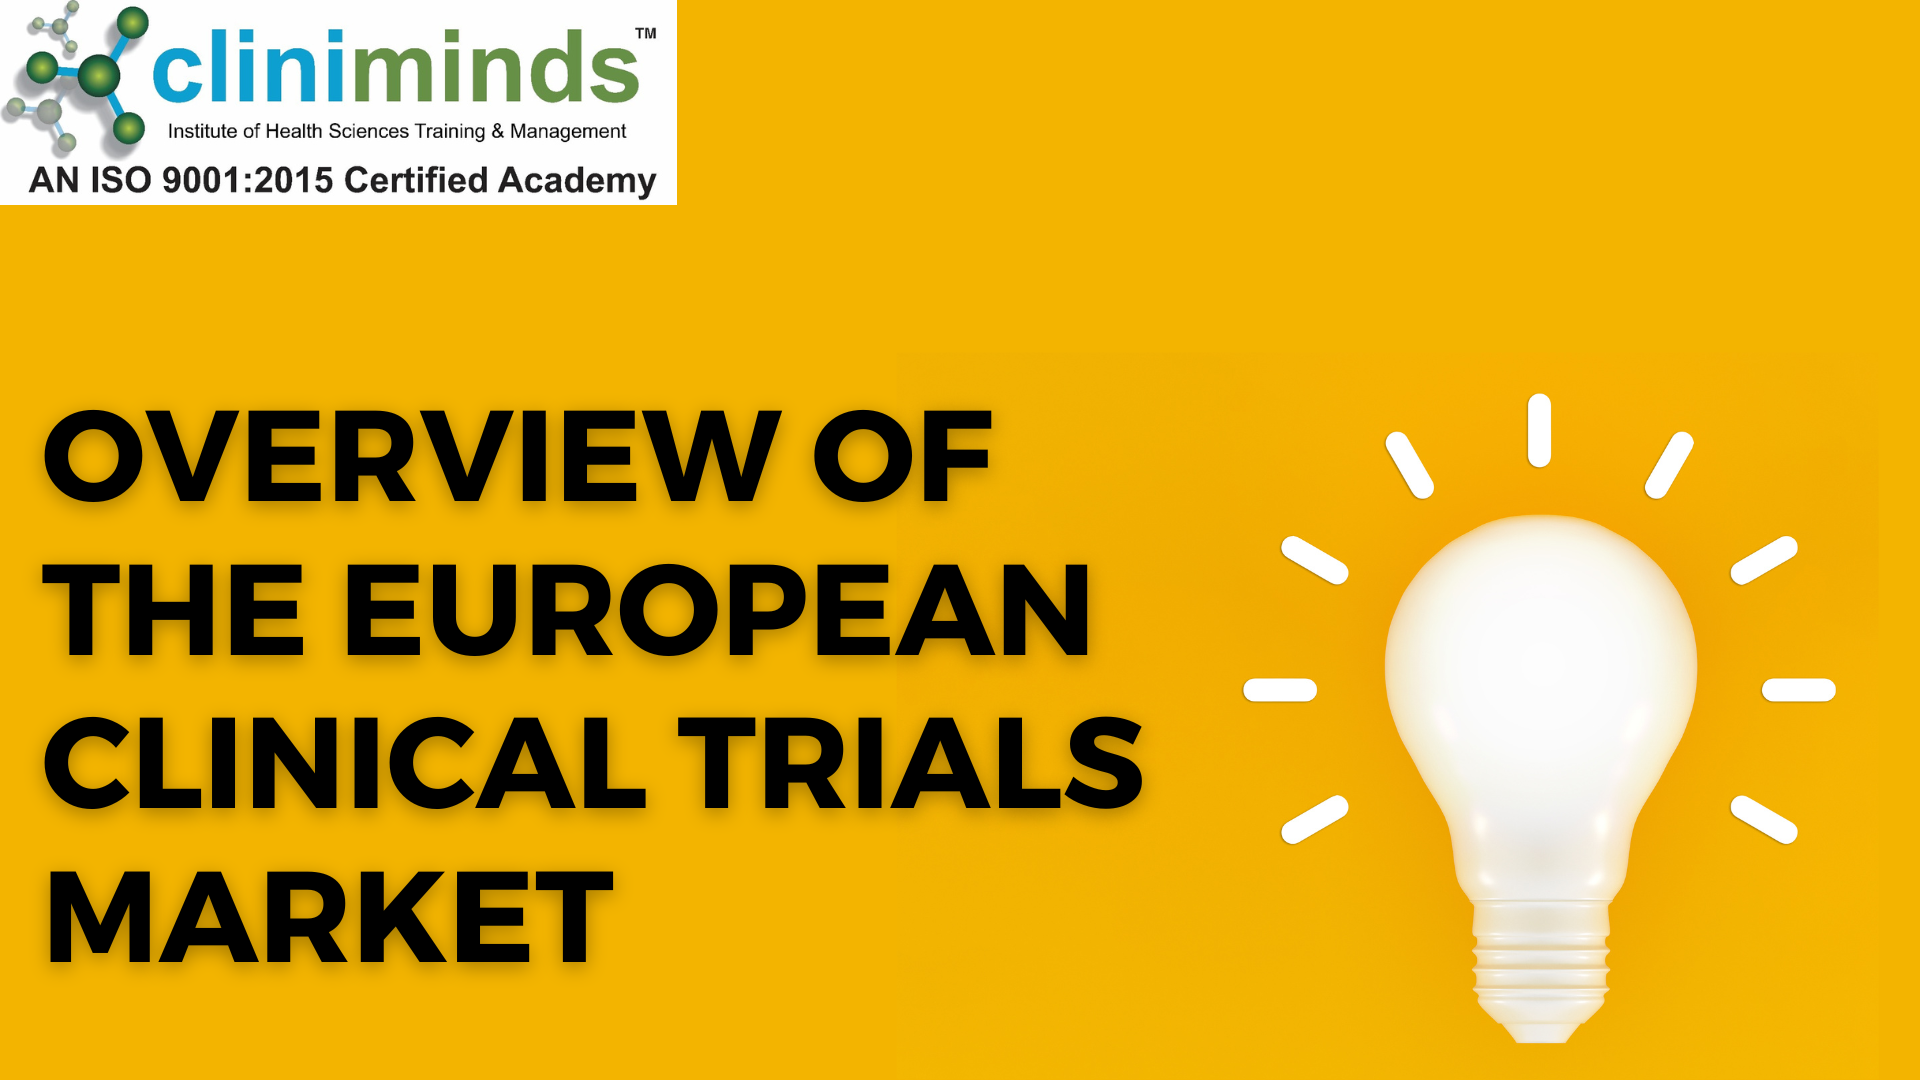 Overview of the European Clinical Trials Market